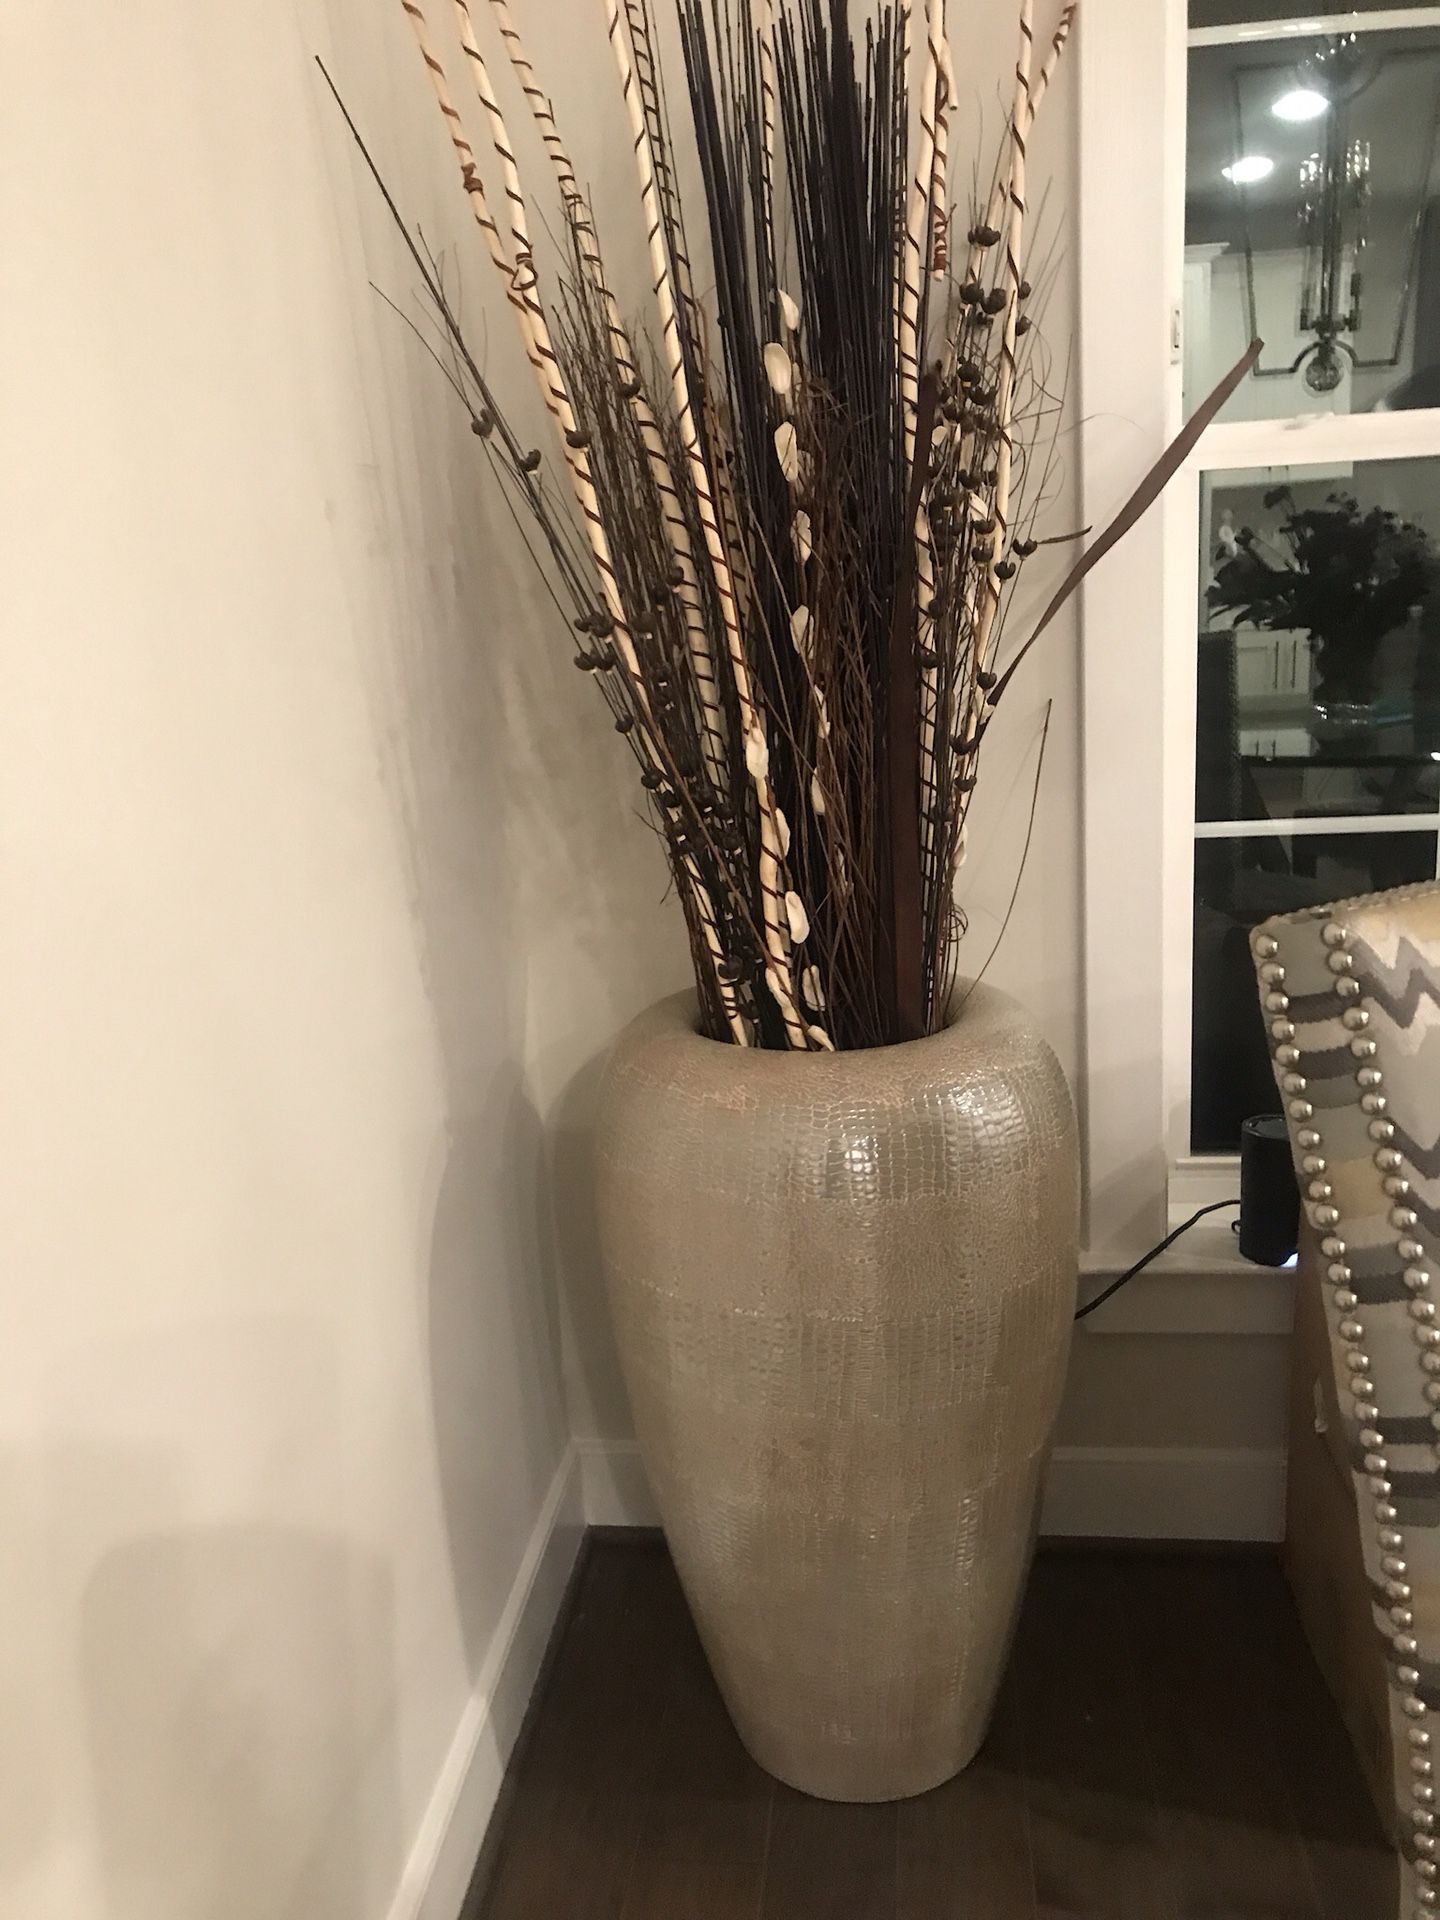 Extra large decorative planter with dried sticks